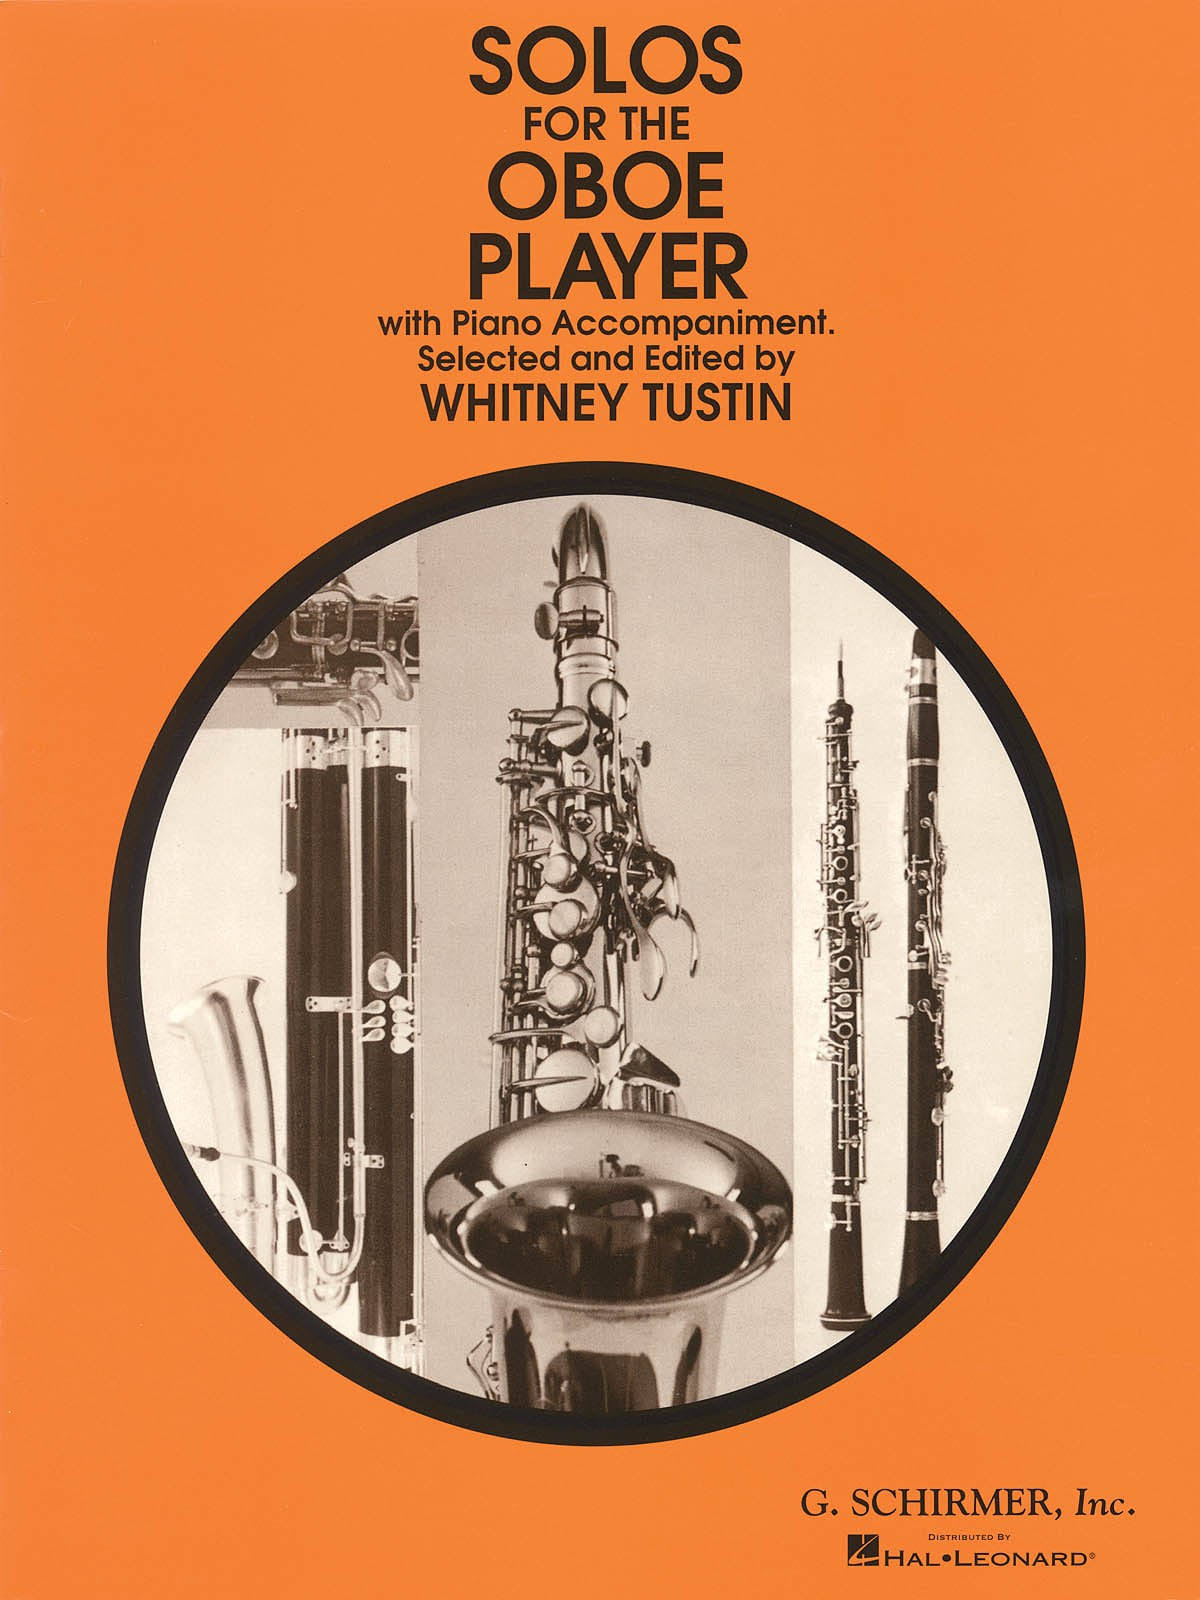 Solos for the Oboe Player - Hal Leonard Publishing